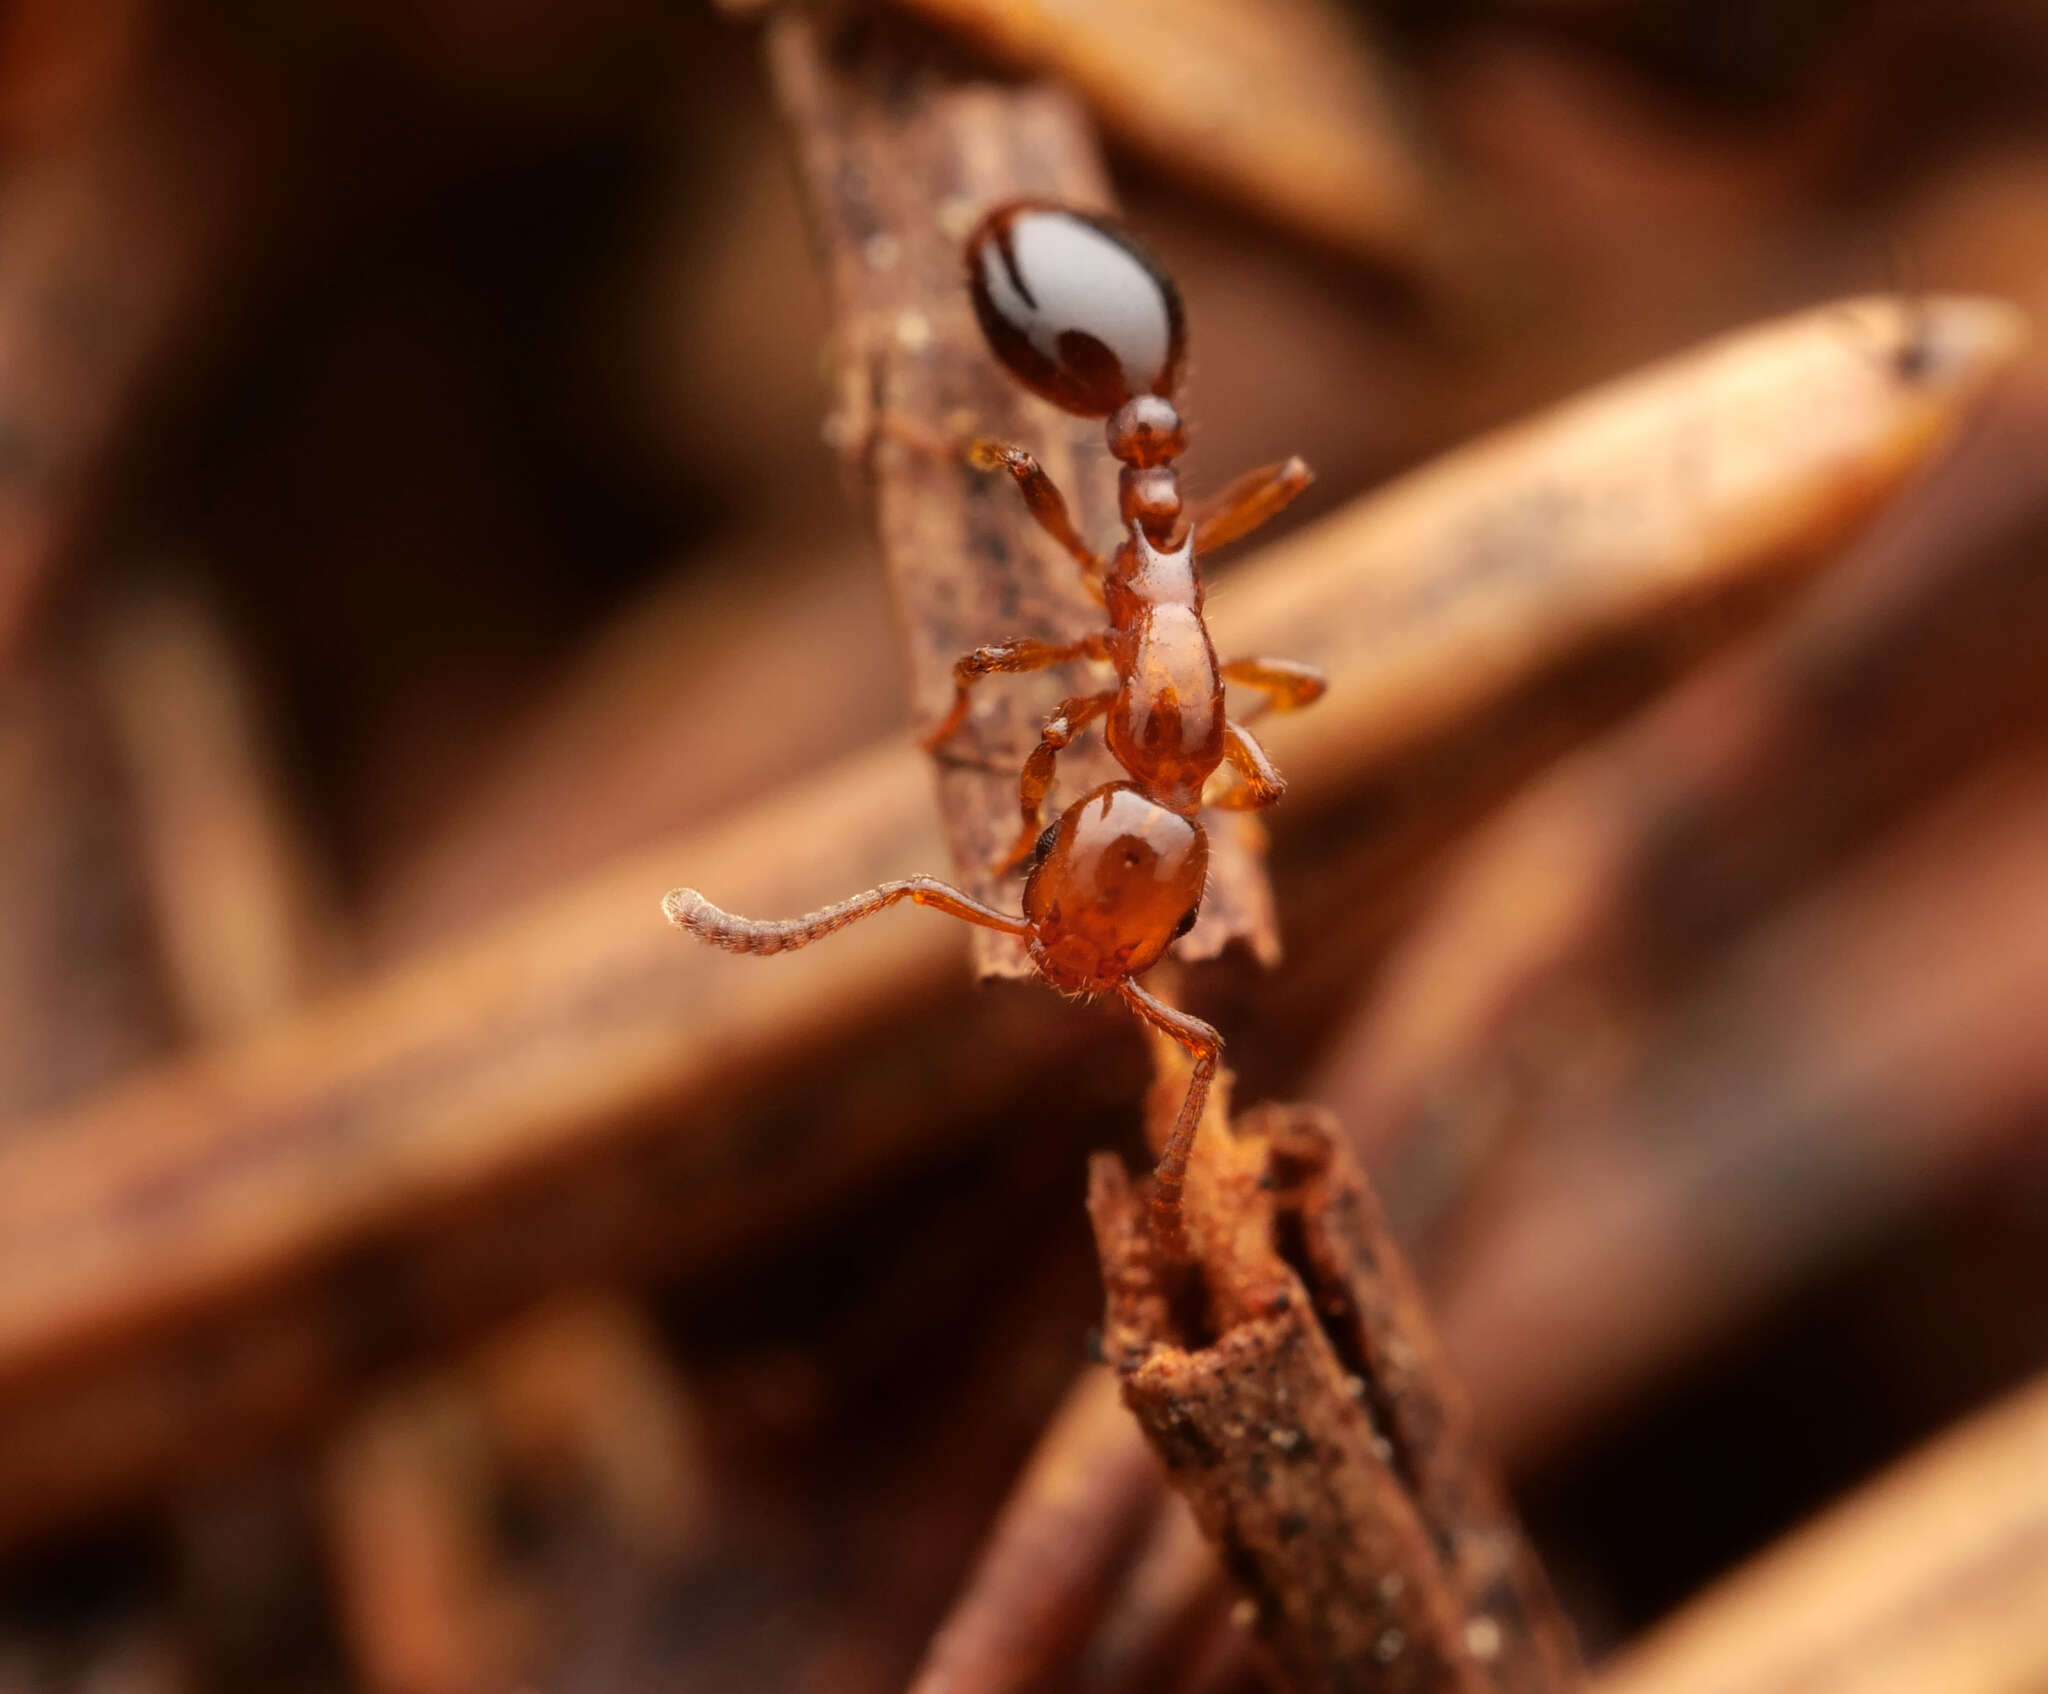 Image of Shining guest ant